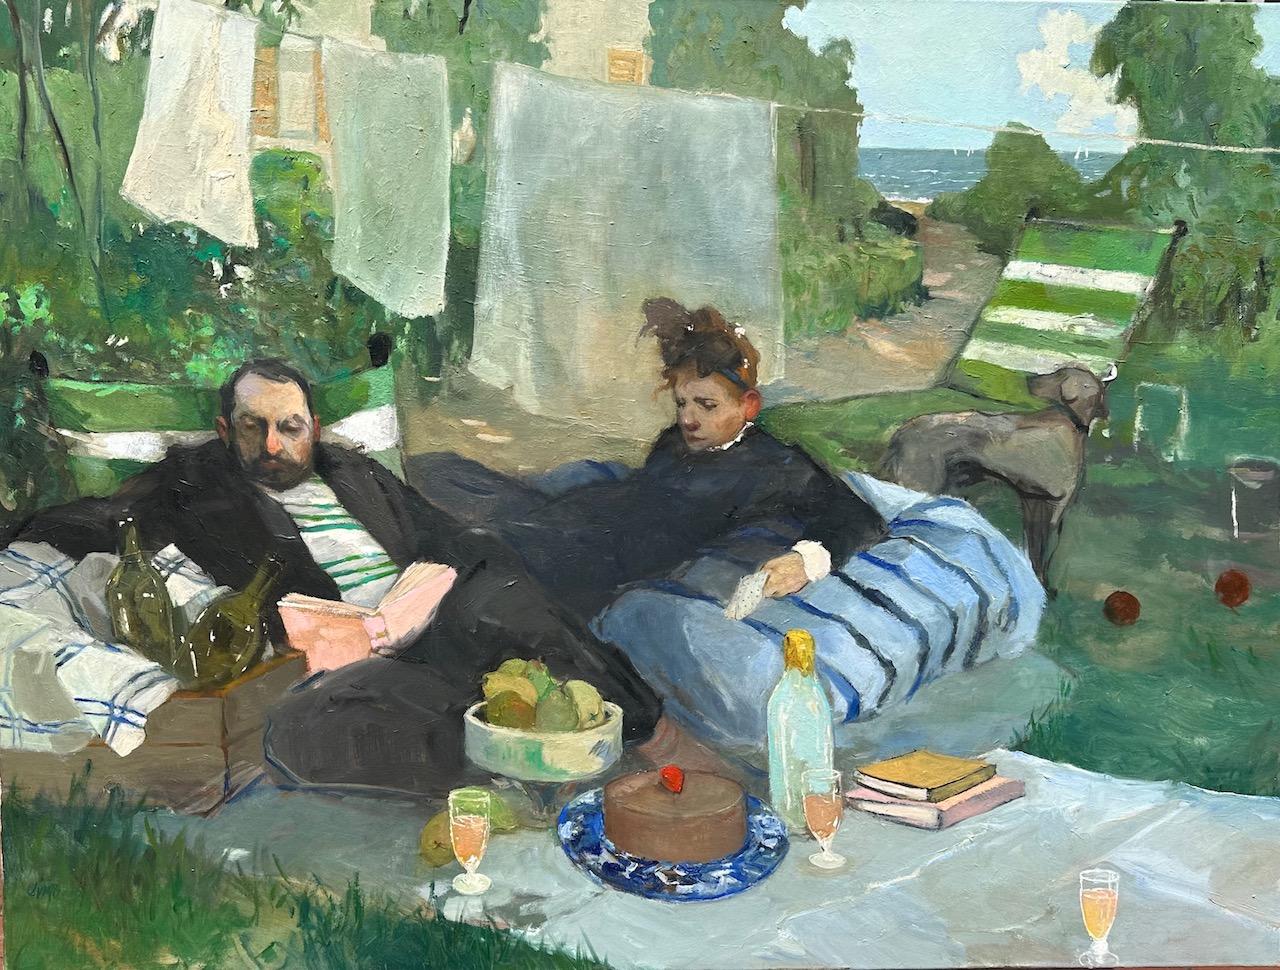 "The Summer House" Two Italian men having a picnic by the sea  - Painting by Jennifer Bell